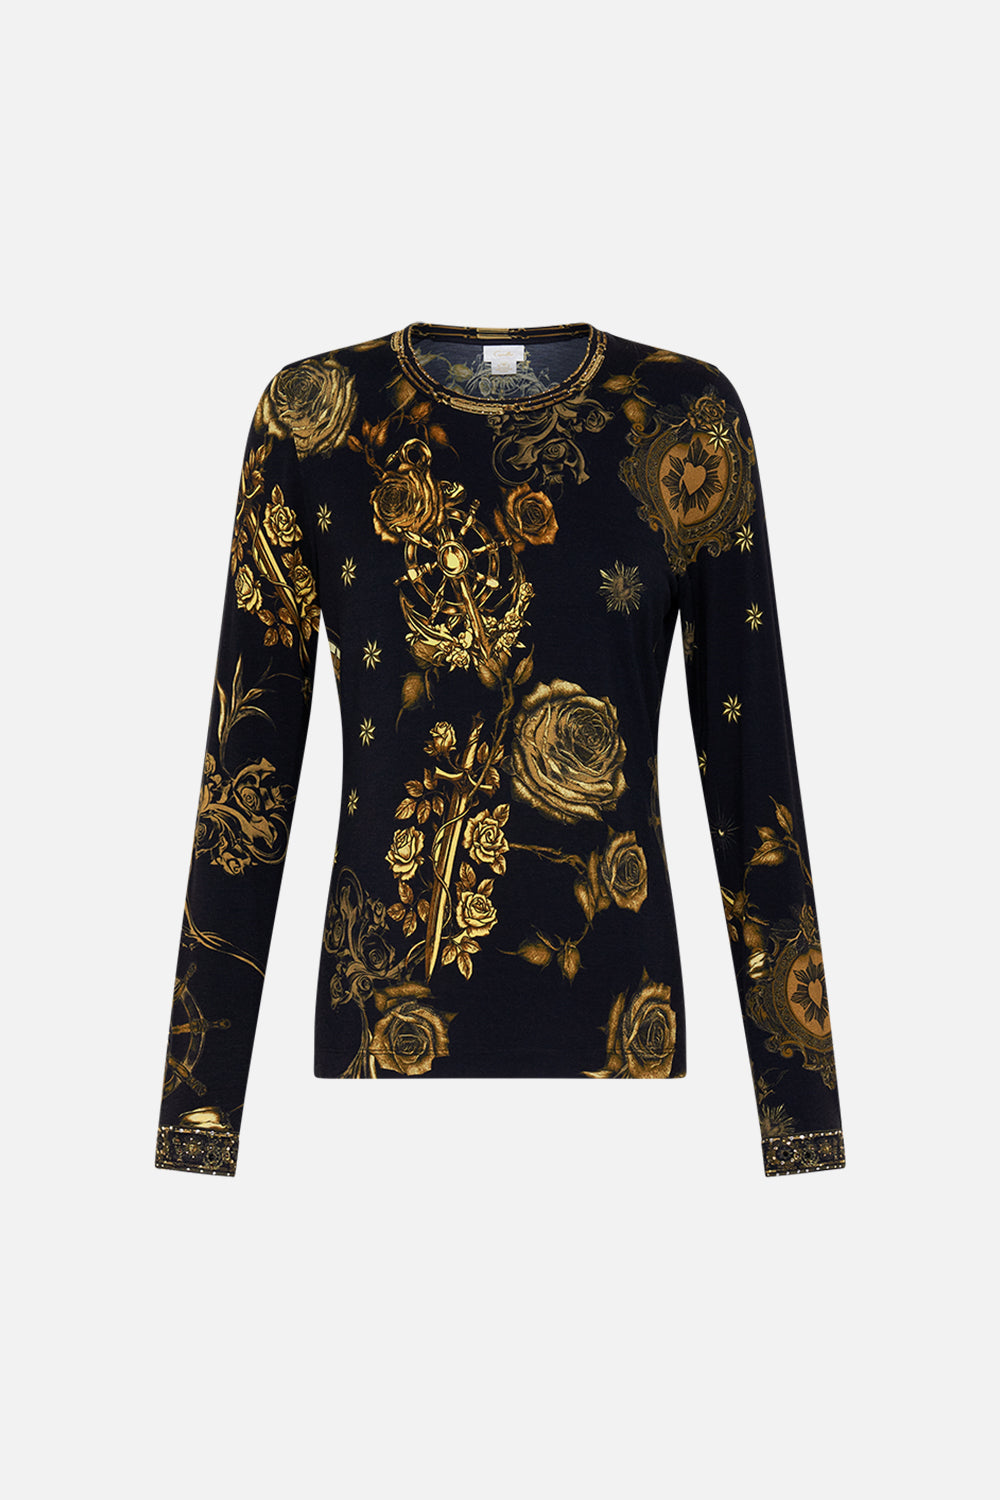 CAMILLA black long sleeve top in So Says the Oracle print. 